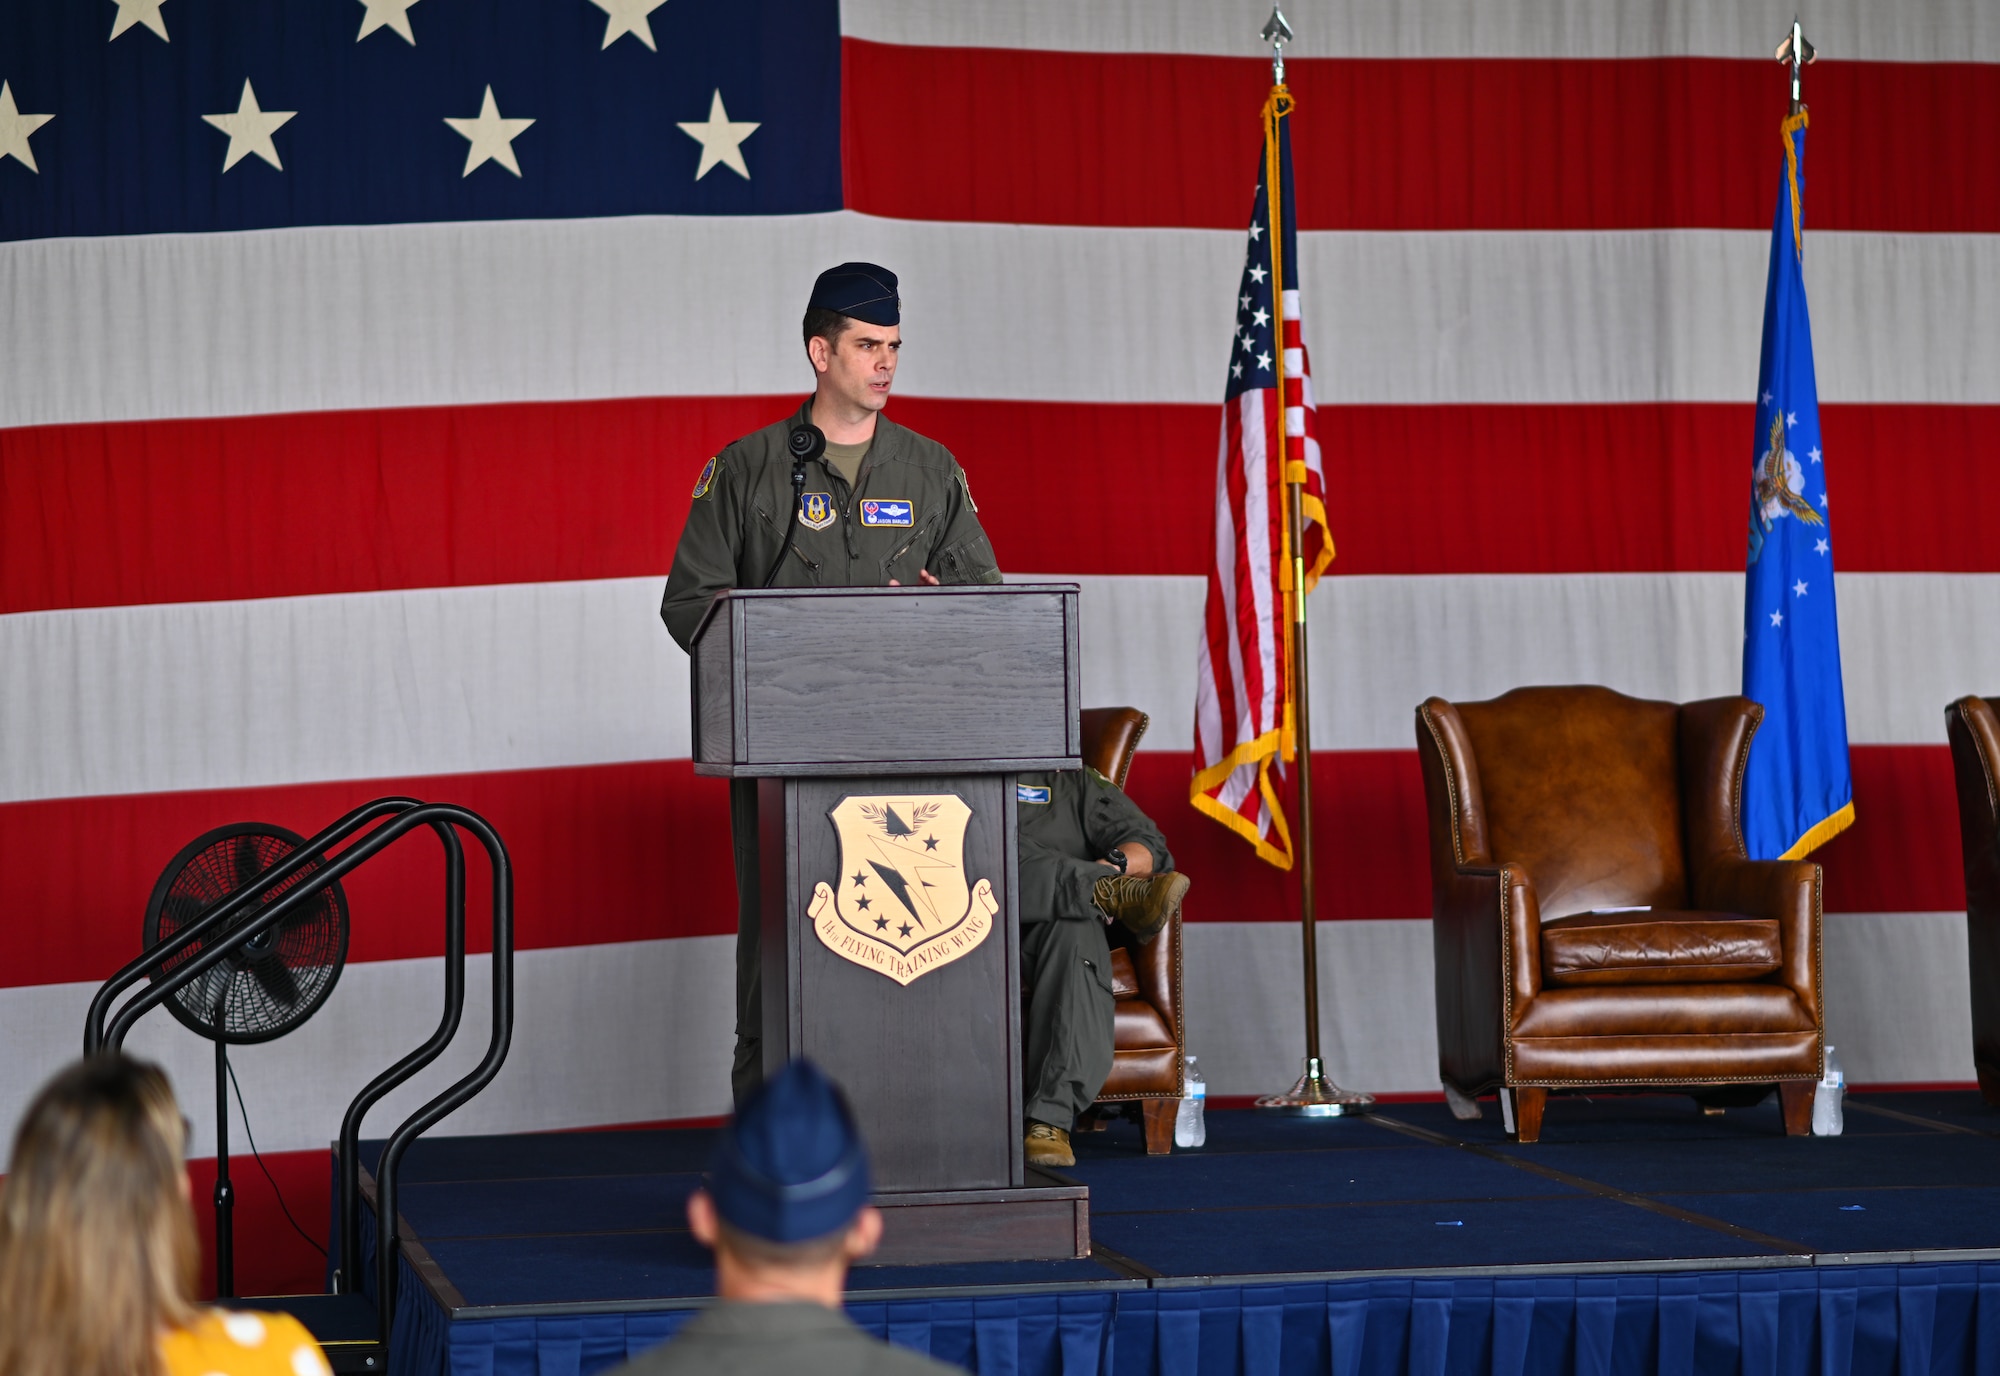 U.S. Air Force Lt. Col. Jason Barlow, 43rd Flying Training Squadron outgoing commander, gives his remarks at the 43rd FTS Change of Command ceremony at the Walker Center, Aug. 26, 2021, on Columbus Air Force Base, Miss. The 43rd Flying Training Squadron administers and executes the AETC/AFRC Associate Instructor Pilot (IP) Program and provides Active Guard Reserve (AGR) and Traditional Reserve (TR) IPs to augment the cadre of active duty pilots conducting pilot training. (U.S. Air Force photo by Senior Airman Jake Jacobsen)